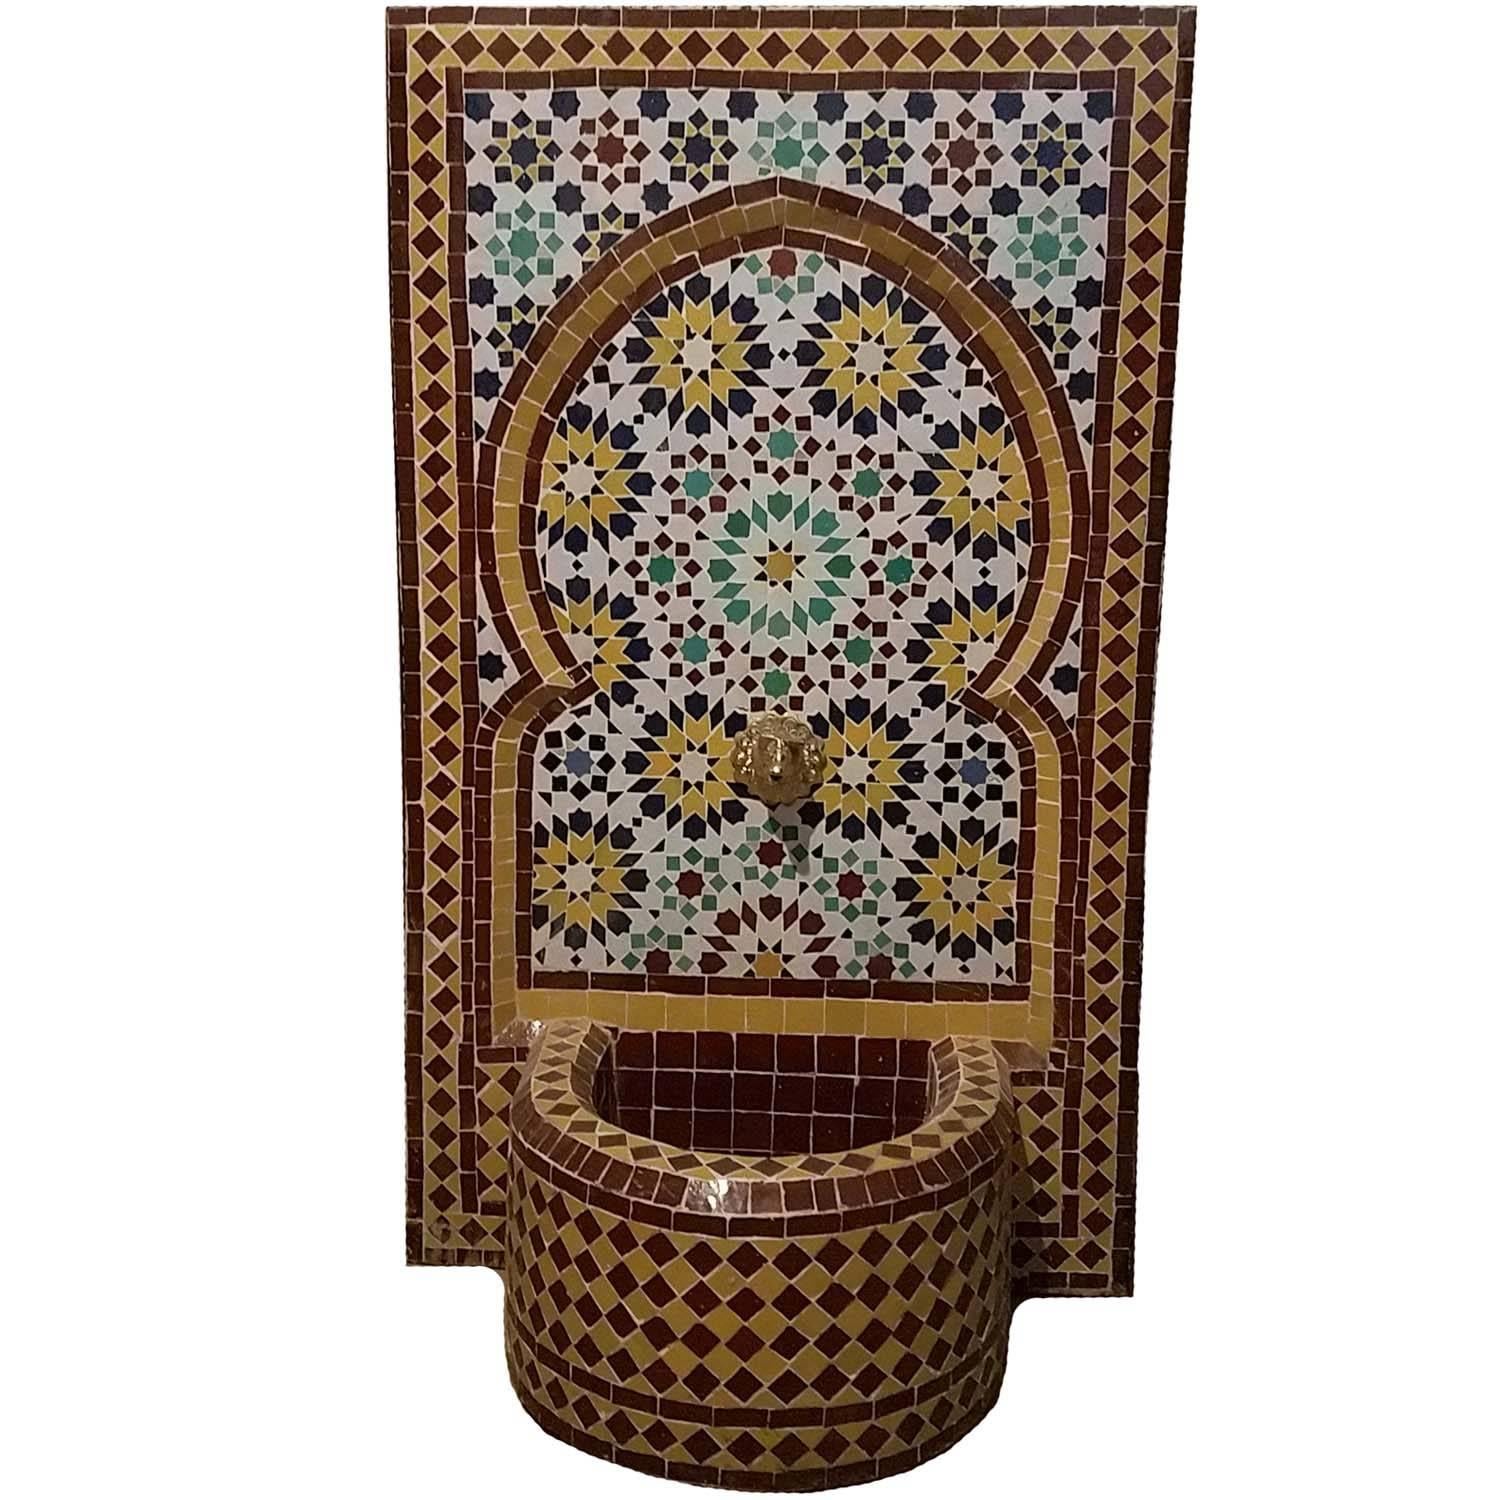 Bella Mosaic Tile Fountain, All Glazed For Sale